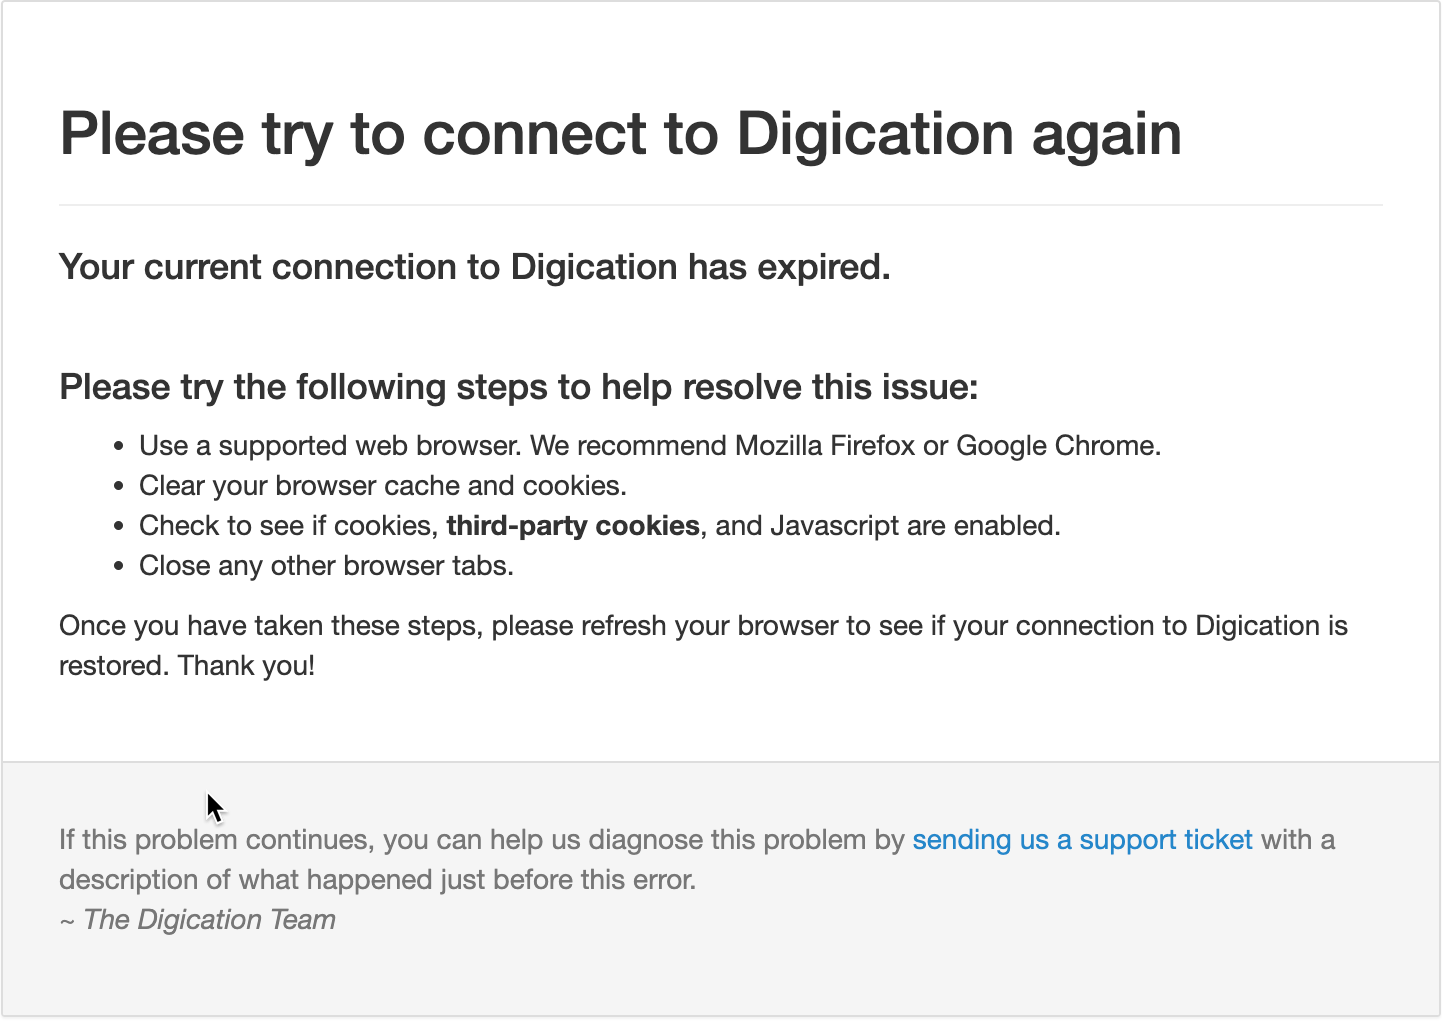 image of the error message produced when one tries to log in to Digication via LMS with third-party cookies blocked